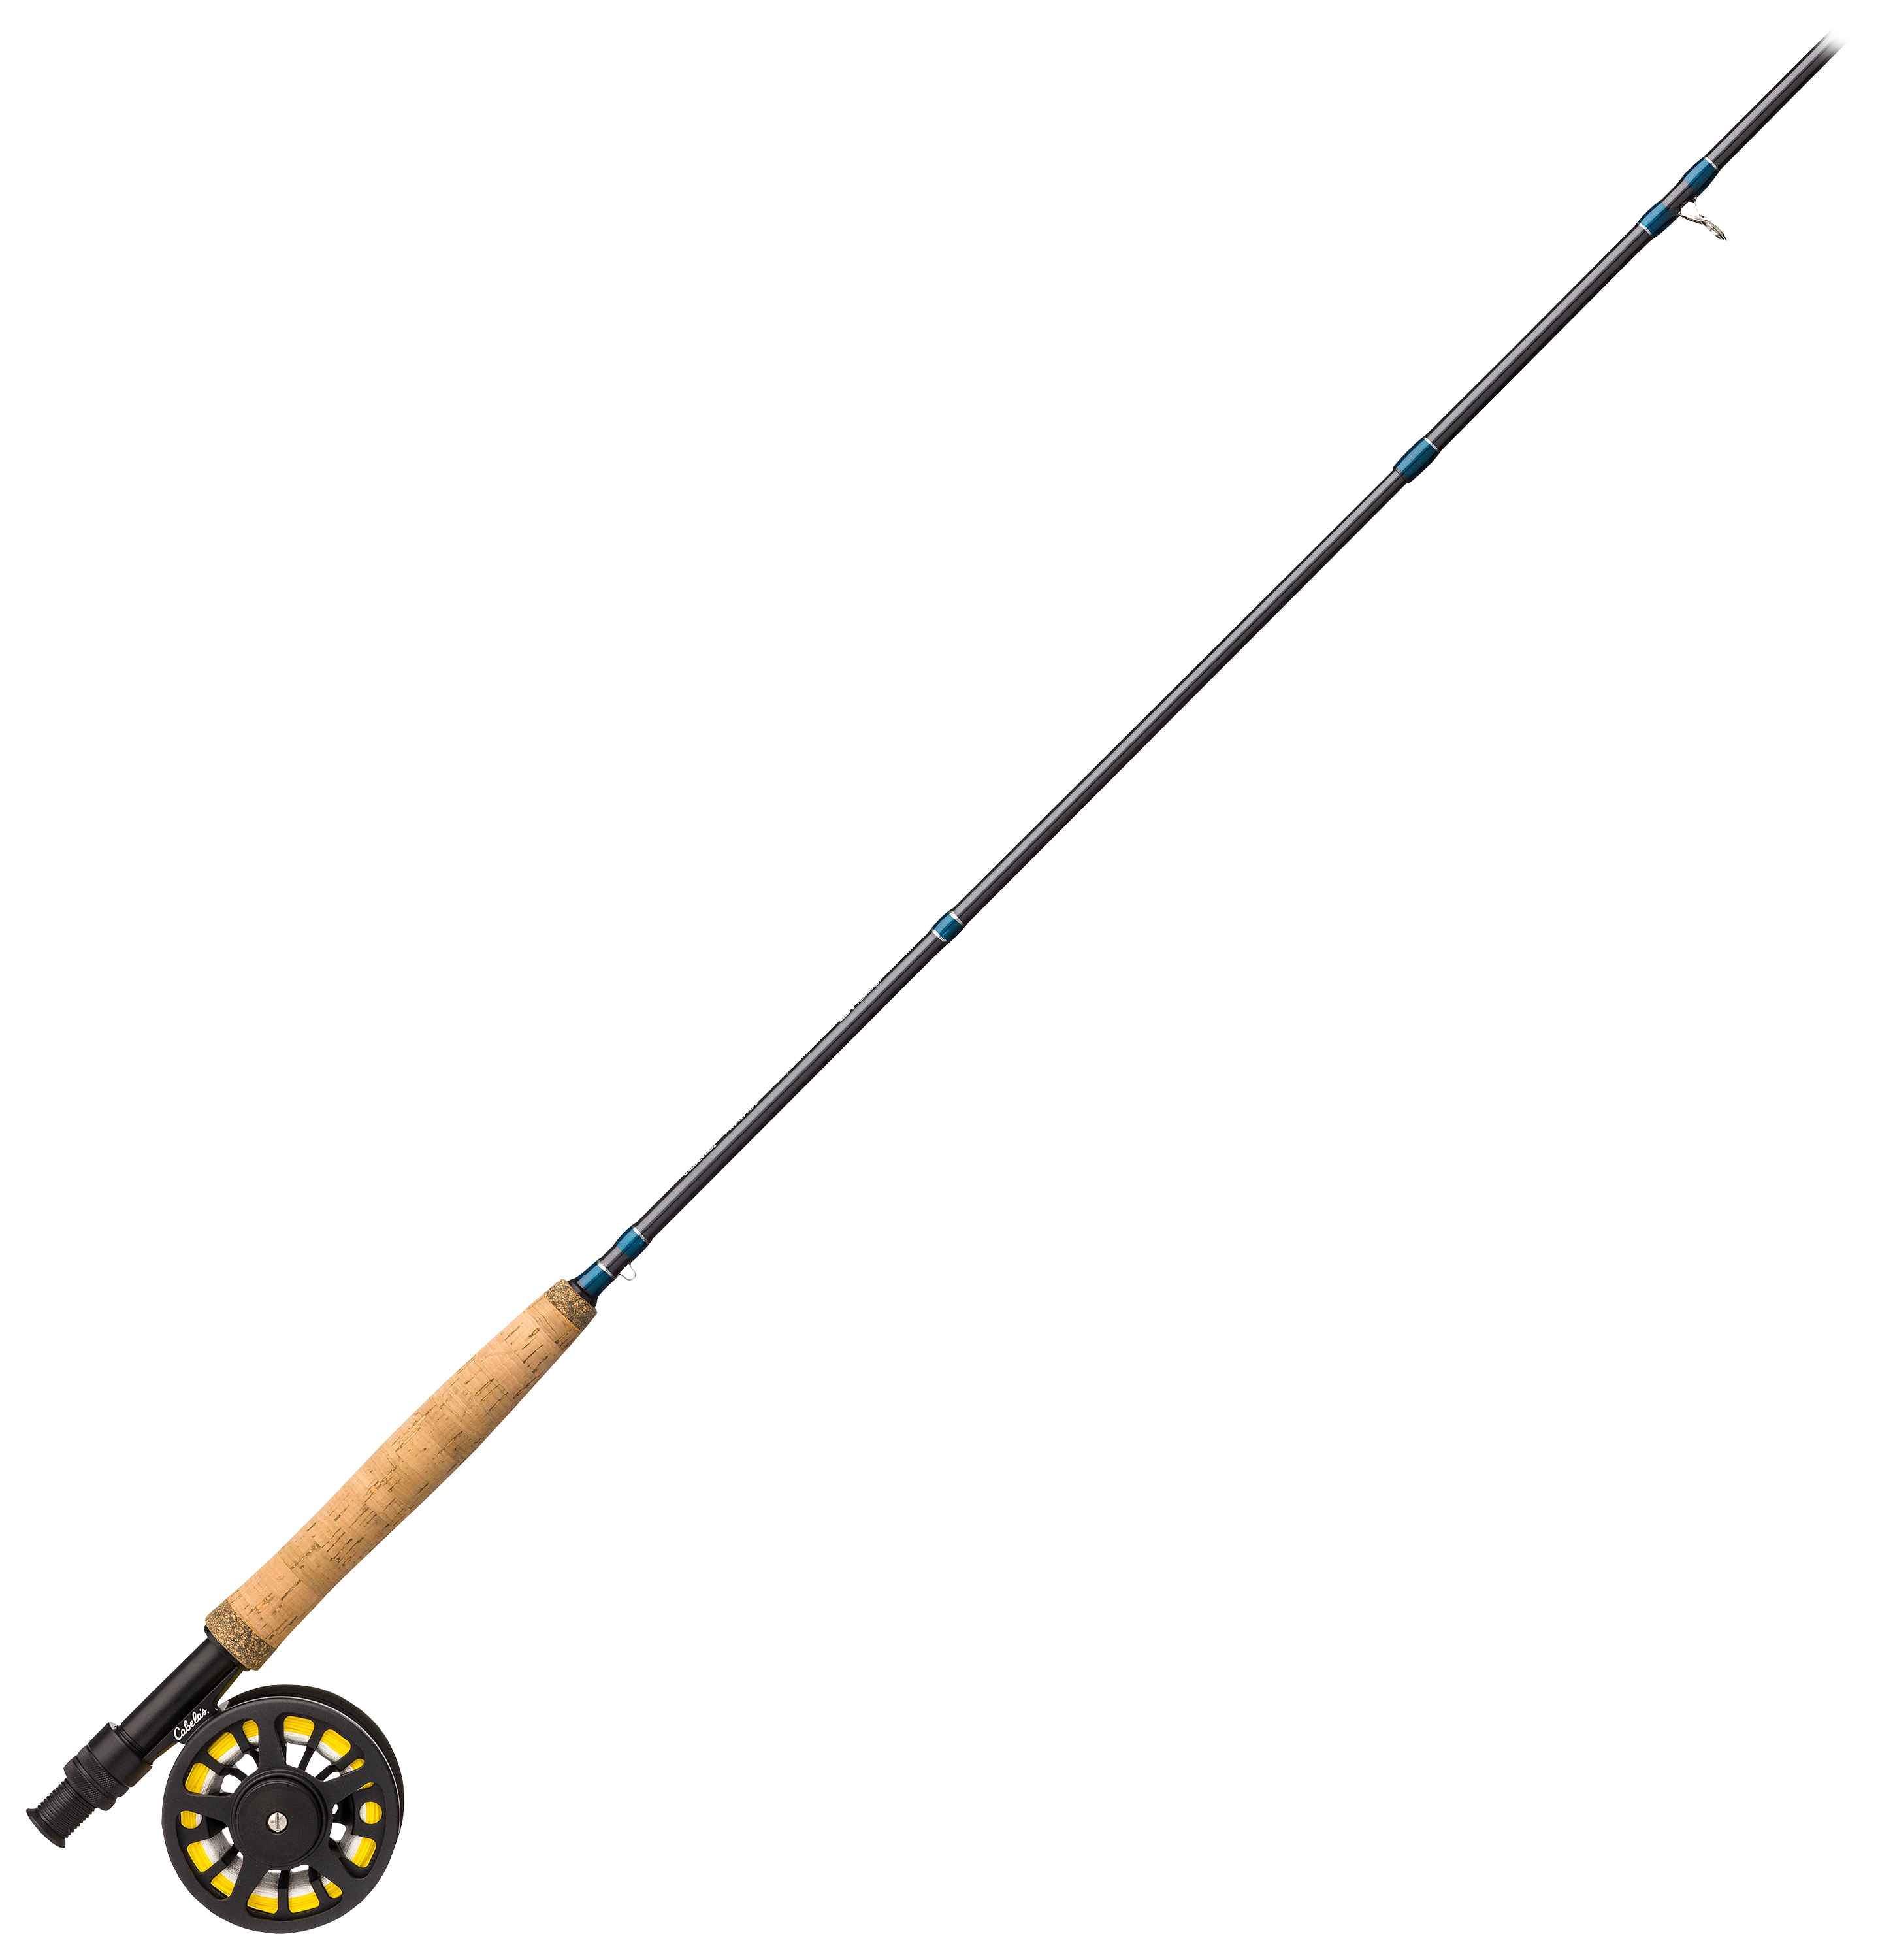 New Fly Rod & Reel - Wind River by Cabela's 